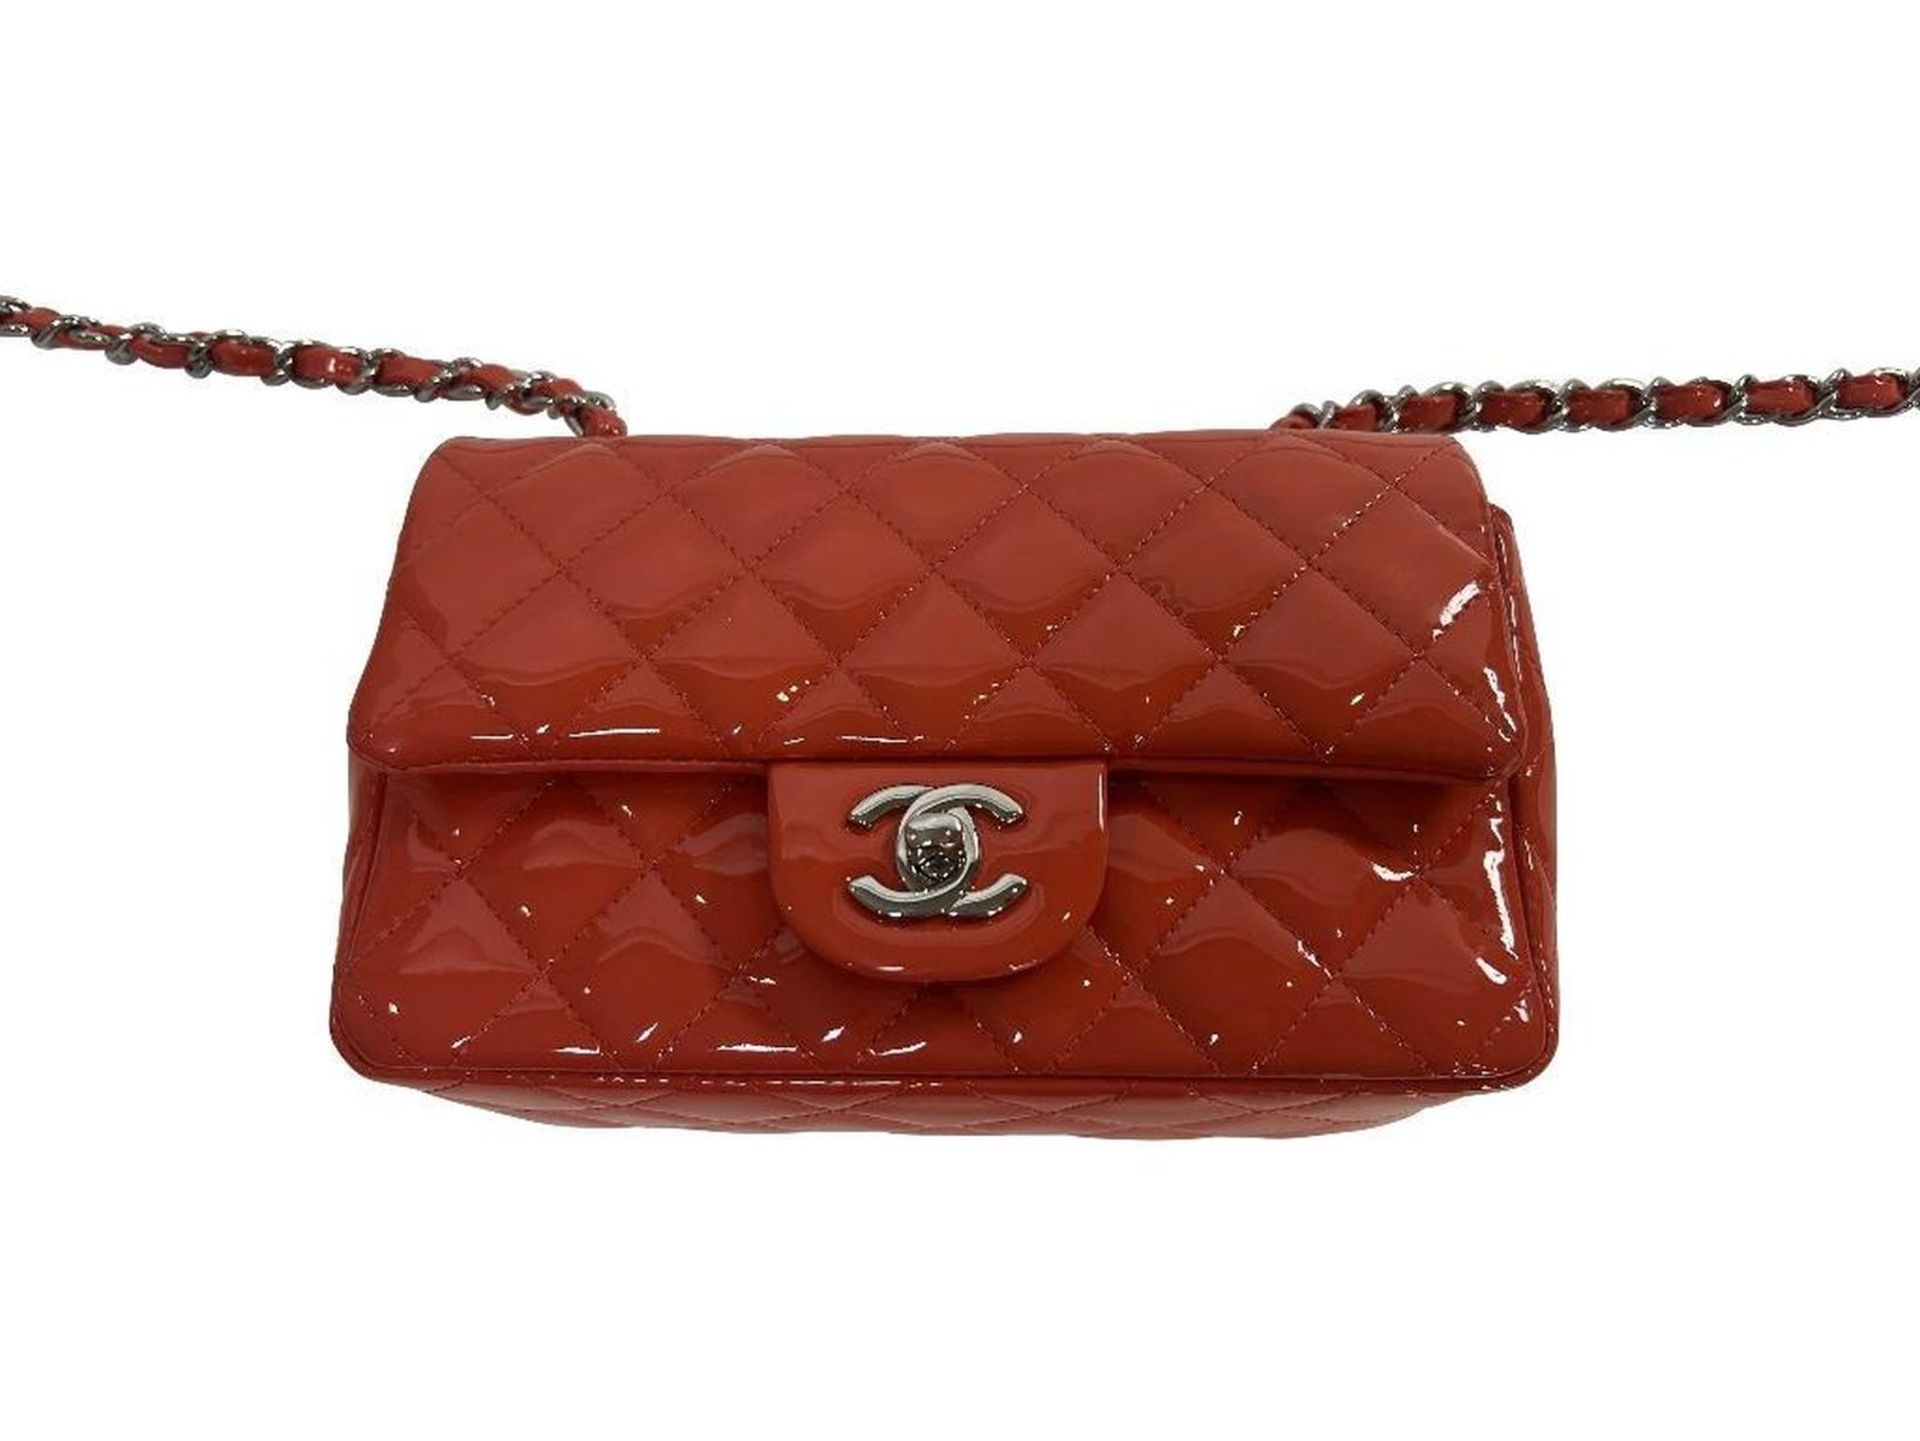 Chanel Coral Chevron Quilted Patent Leather Mini Flap Bag - Image 7 of 8